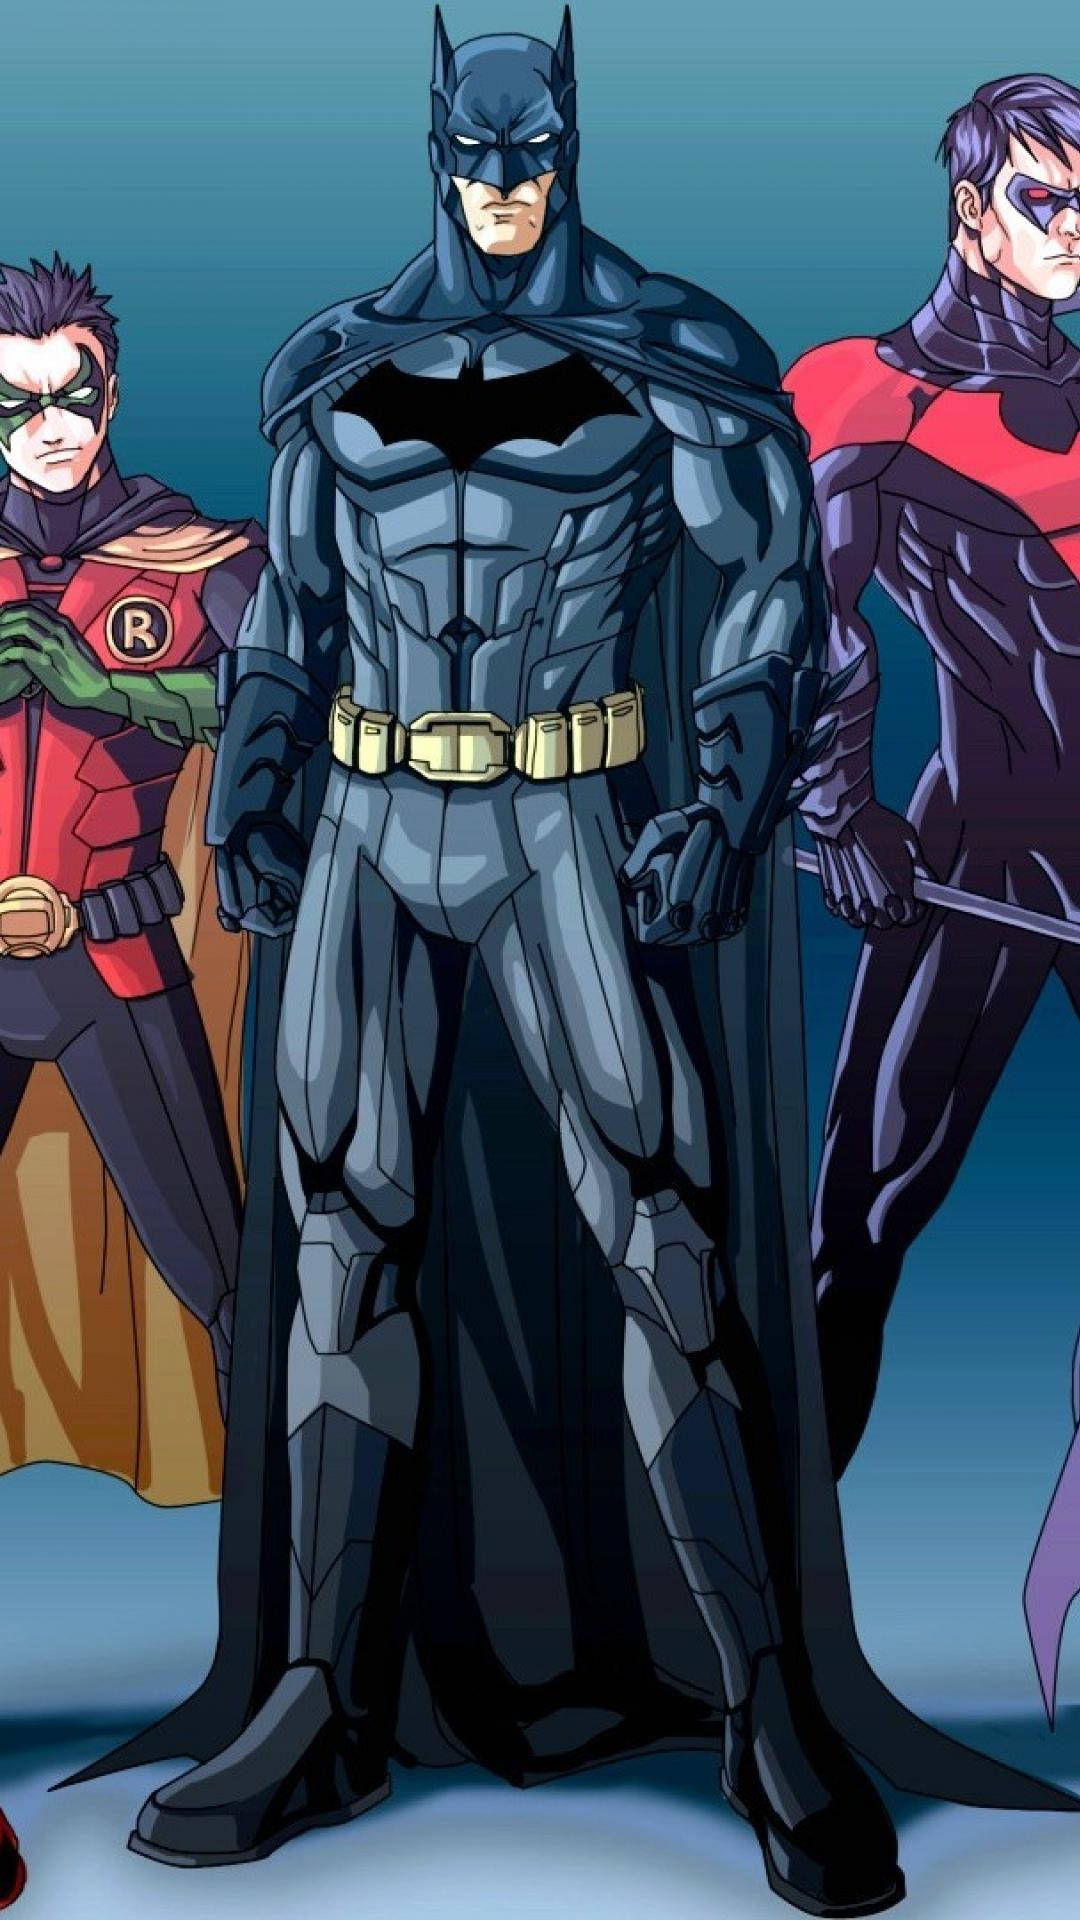 Red Hood, Batman And Nightwing Background